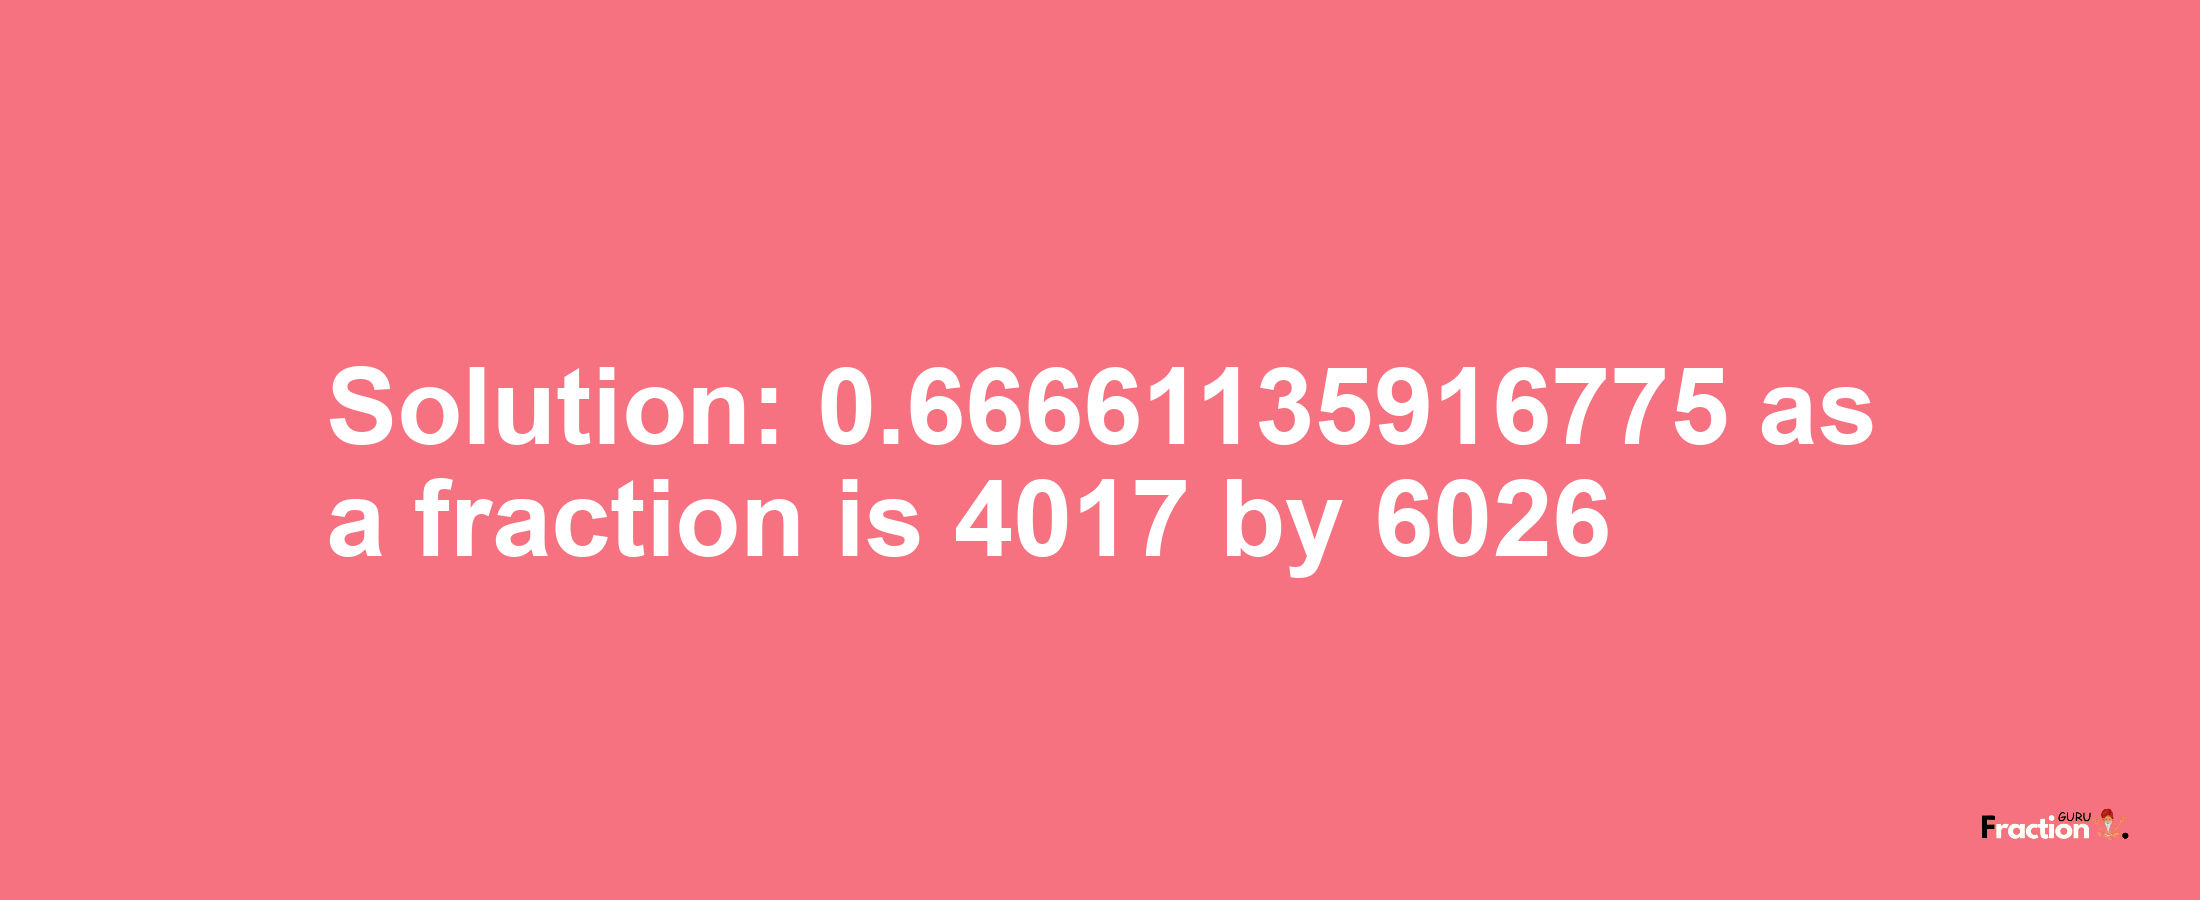 Solution:0.66661135916775 as a fraction is 4017/6026